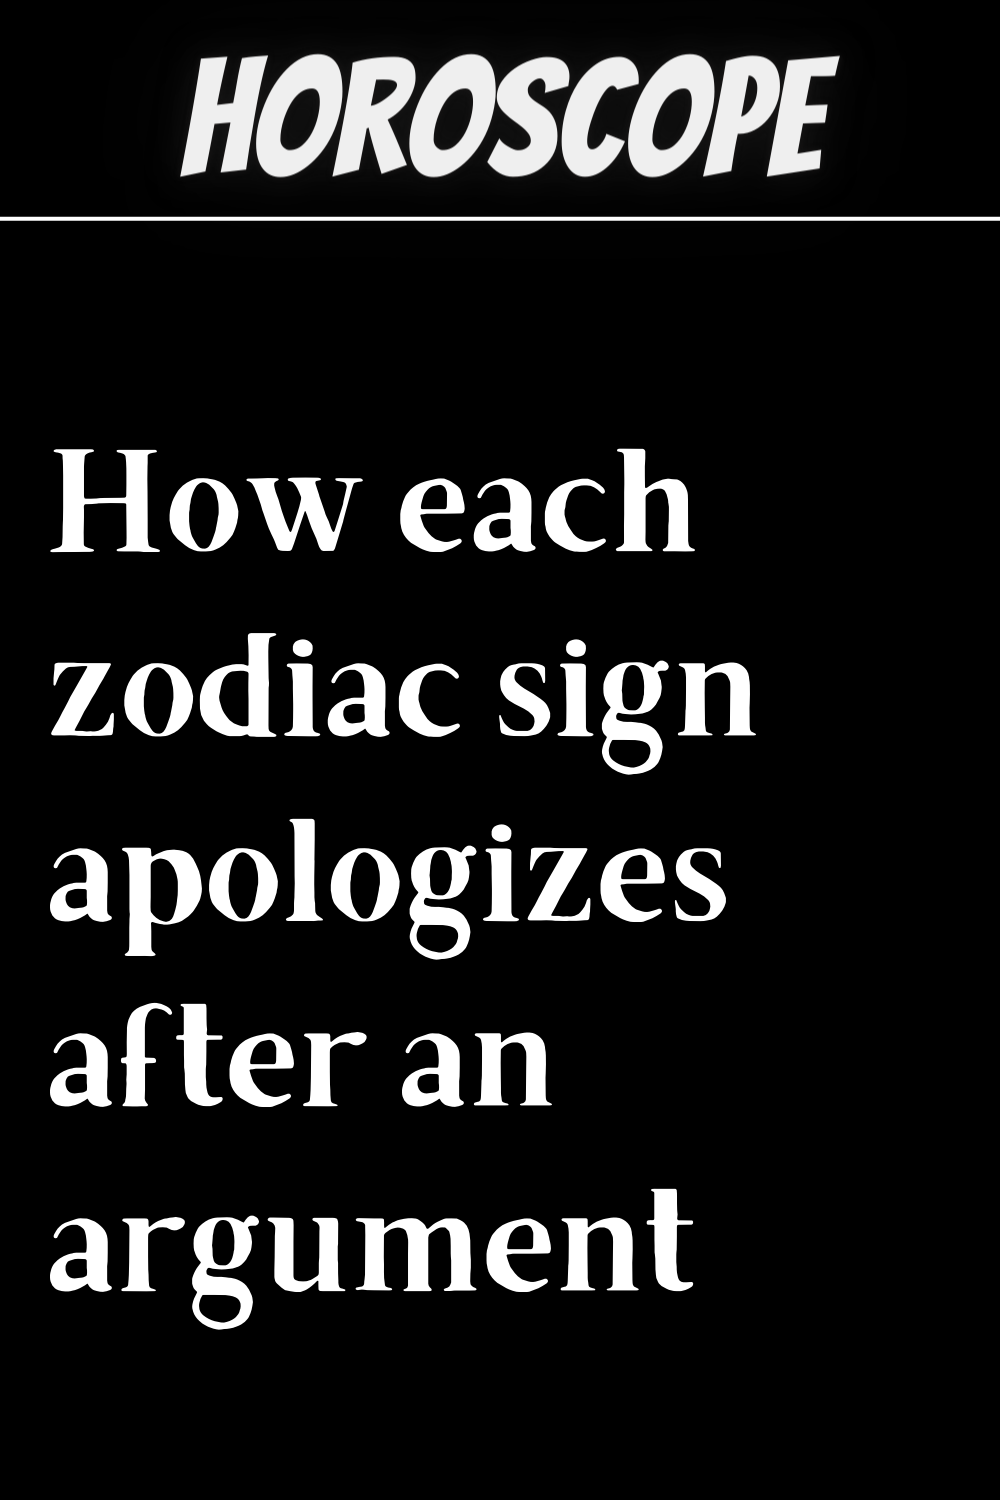 How each zodiac sign apologizes after an argument